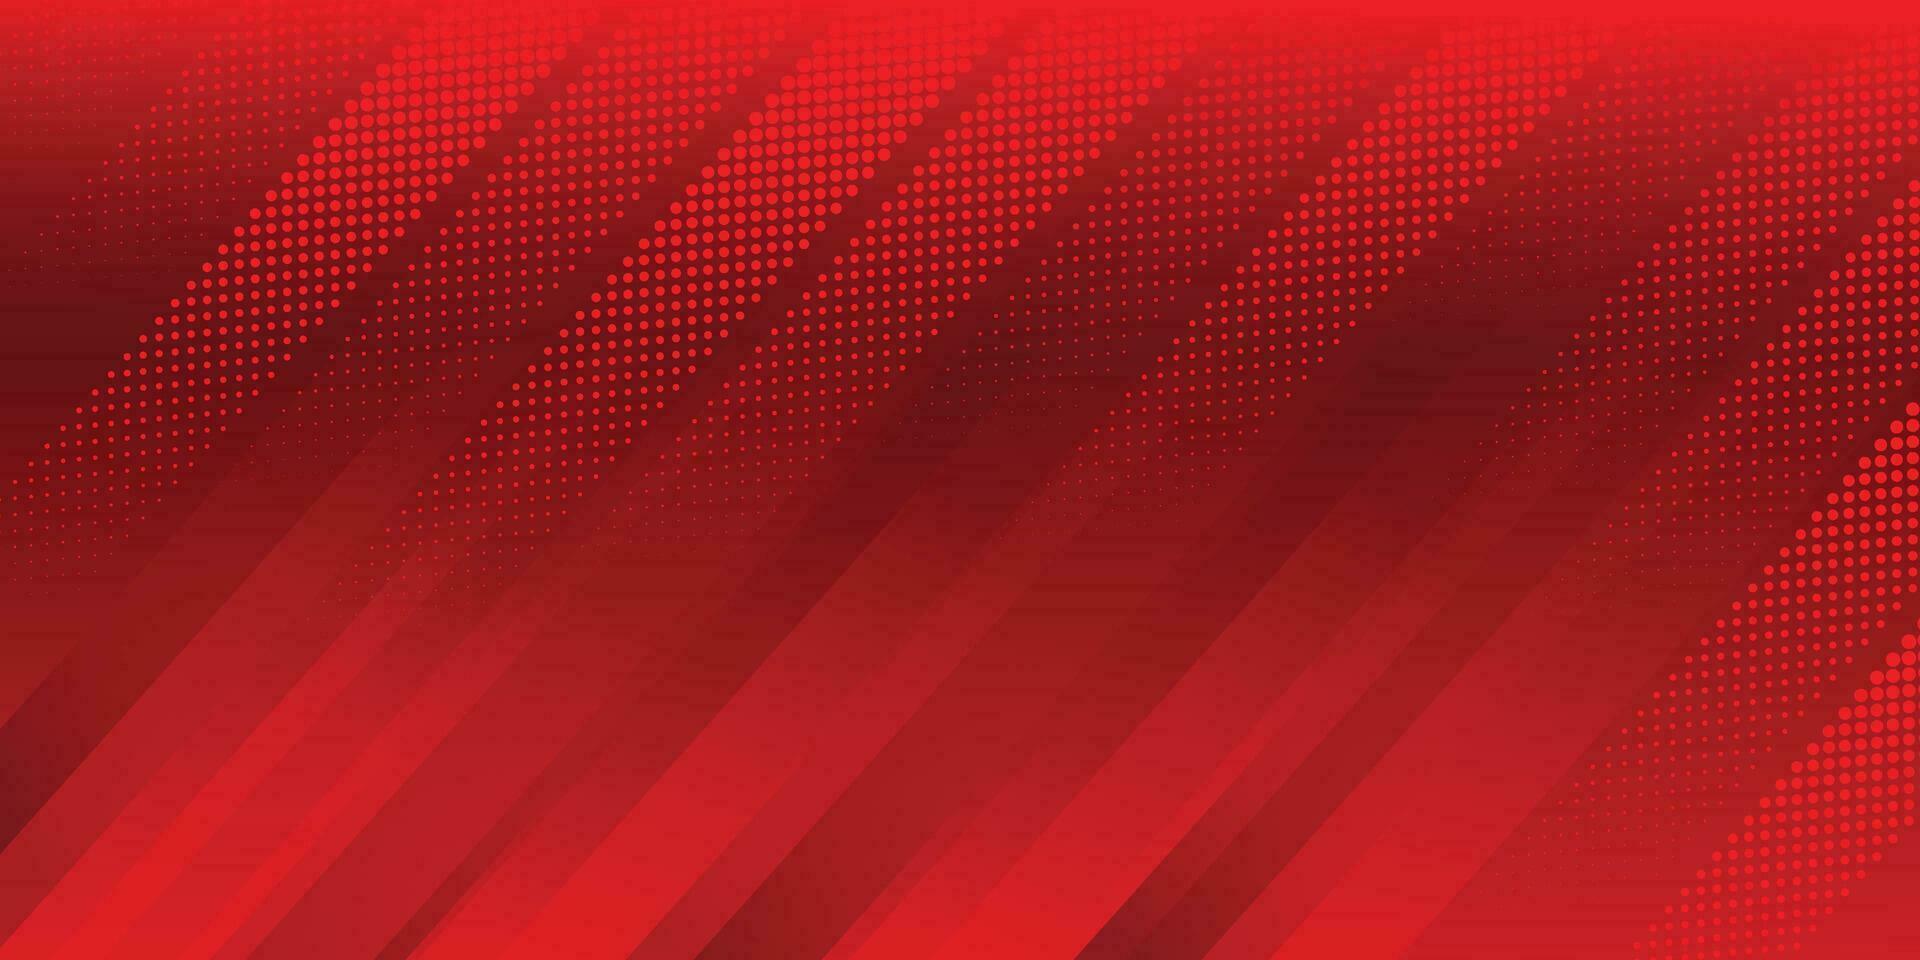 Red and black background with diagonal lines vector